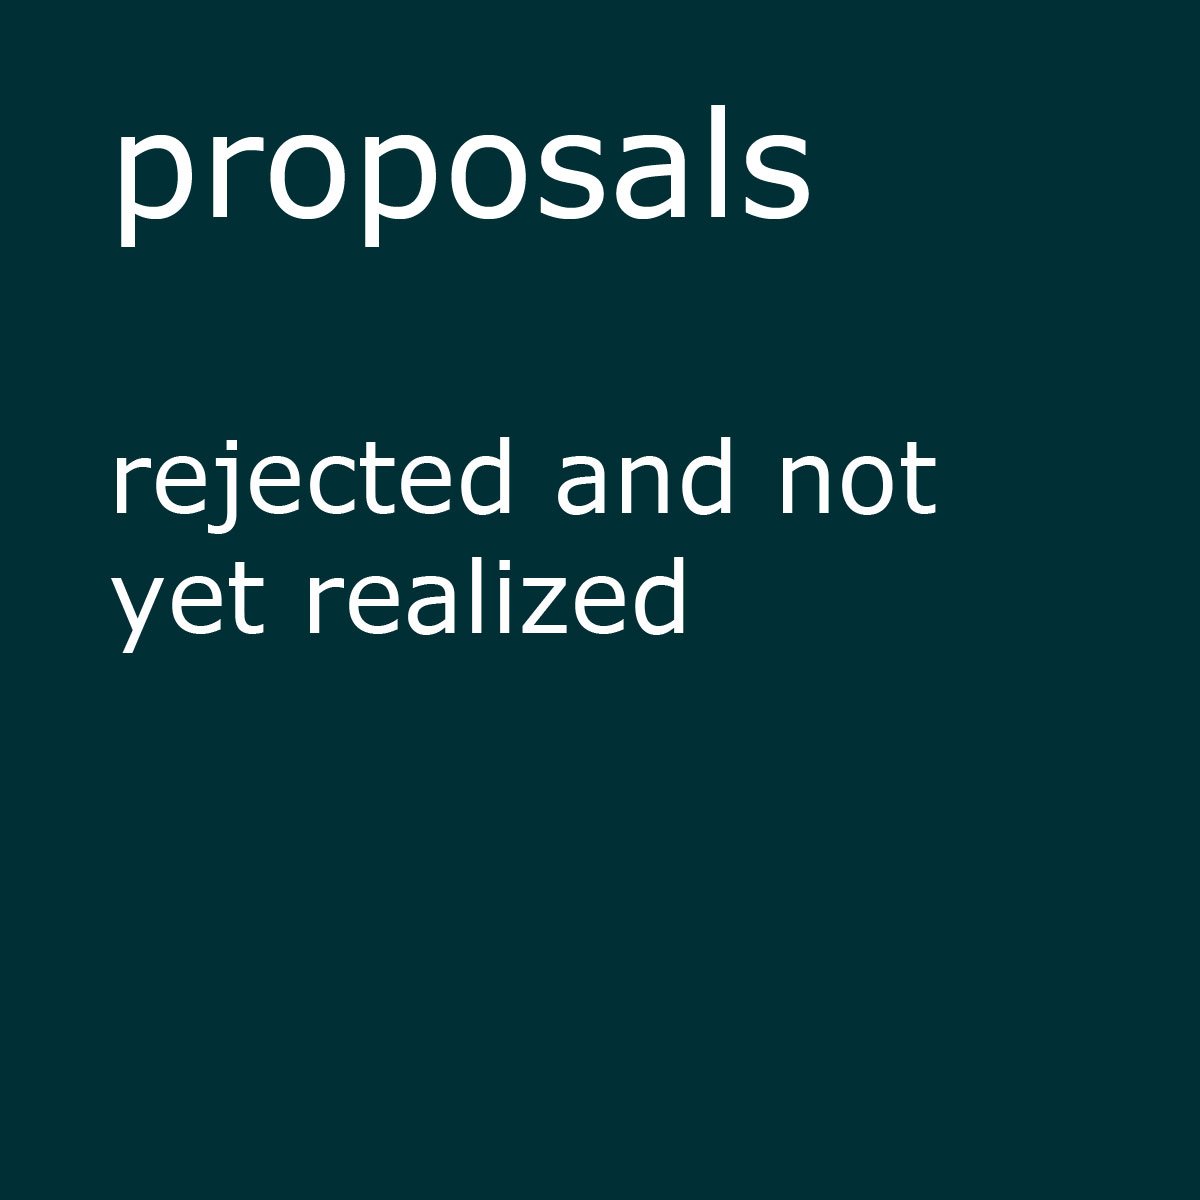 proposals: rejected and not yet realized